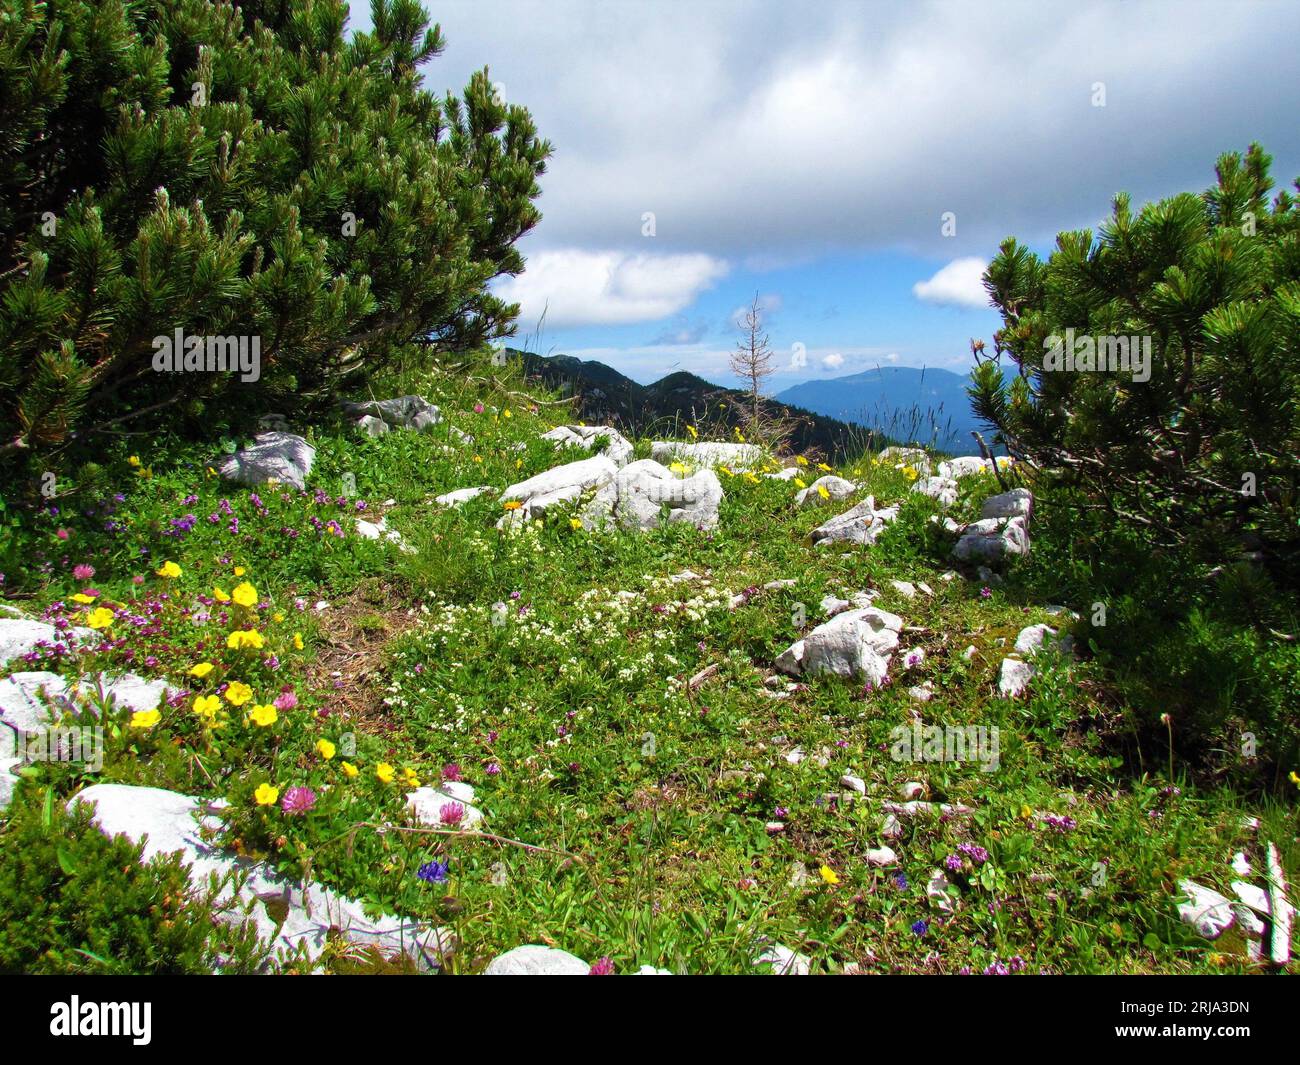 Colorful alpine wildgarden with yellow white and pink flowers incl. alpine rock-rose (Helianthemum alpestre) and red clover (Trifolium pratense) in Ju Stock Photo